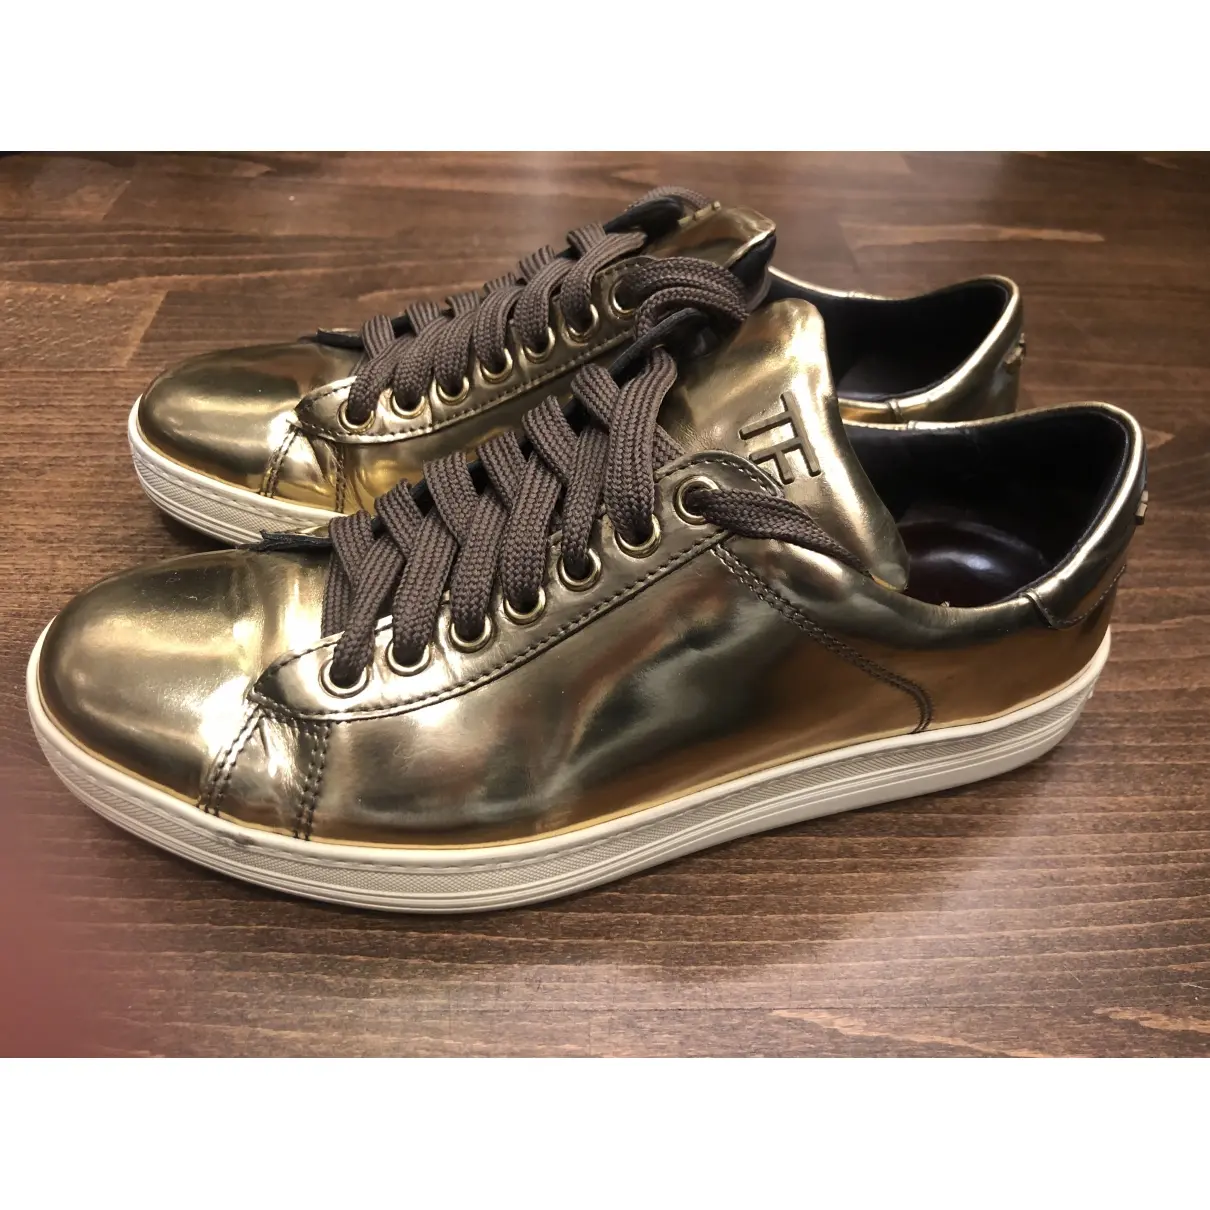 Tom Ford Patent leather trainers for sale